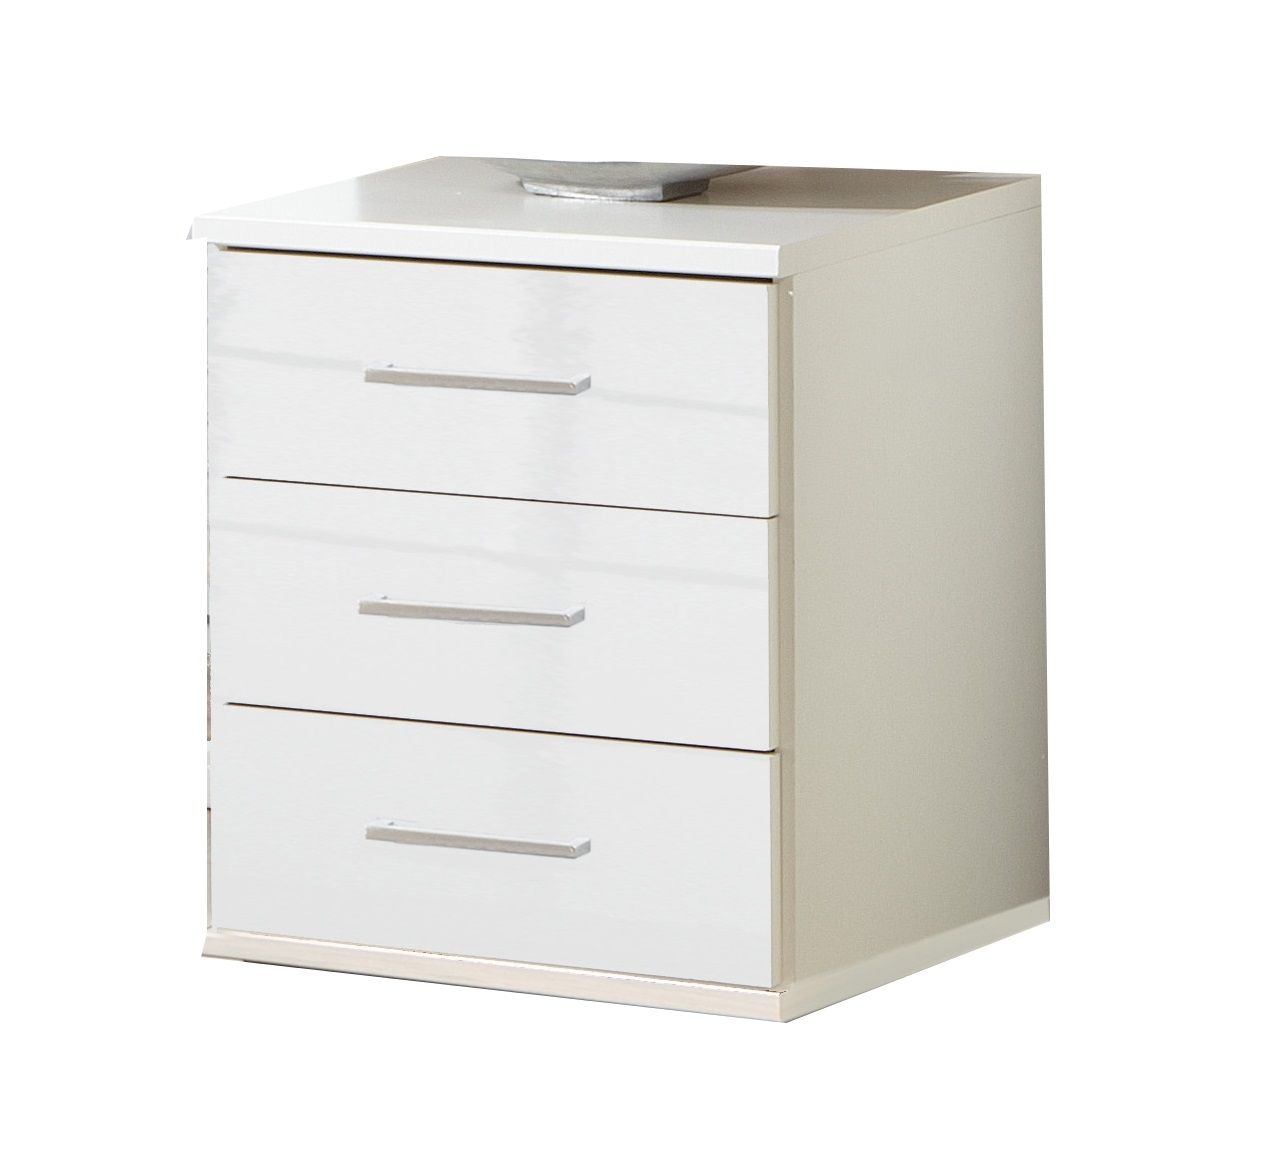 Clappen 3 Drawer Gloss Bedside Chest - White